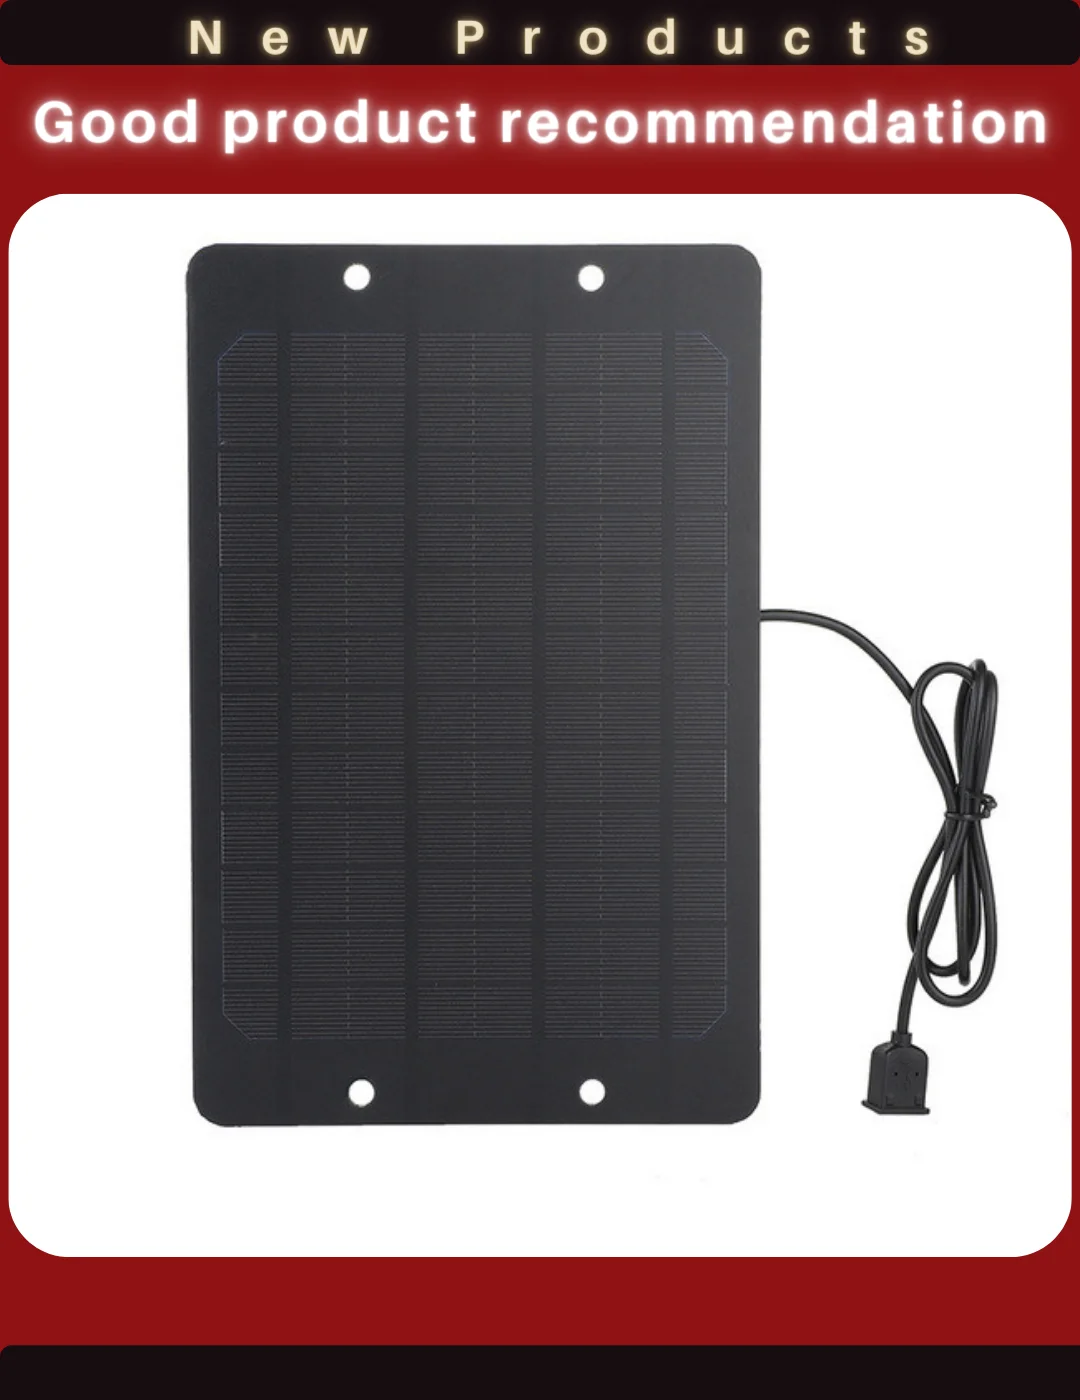 Solar Panel 12v Power Bank Plate Kit Complete Camping Cell Charger Portable Battery Generator System For Complete Energy Panel